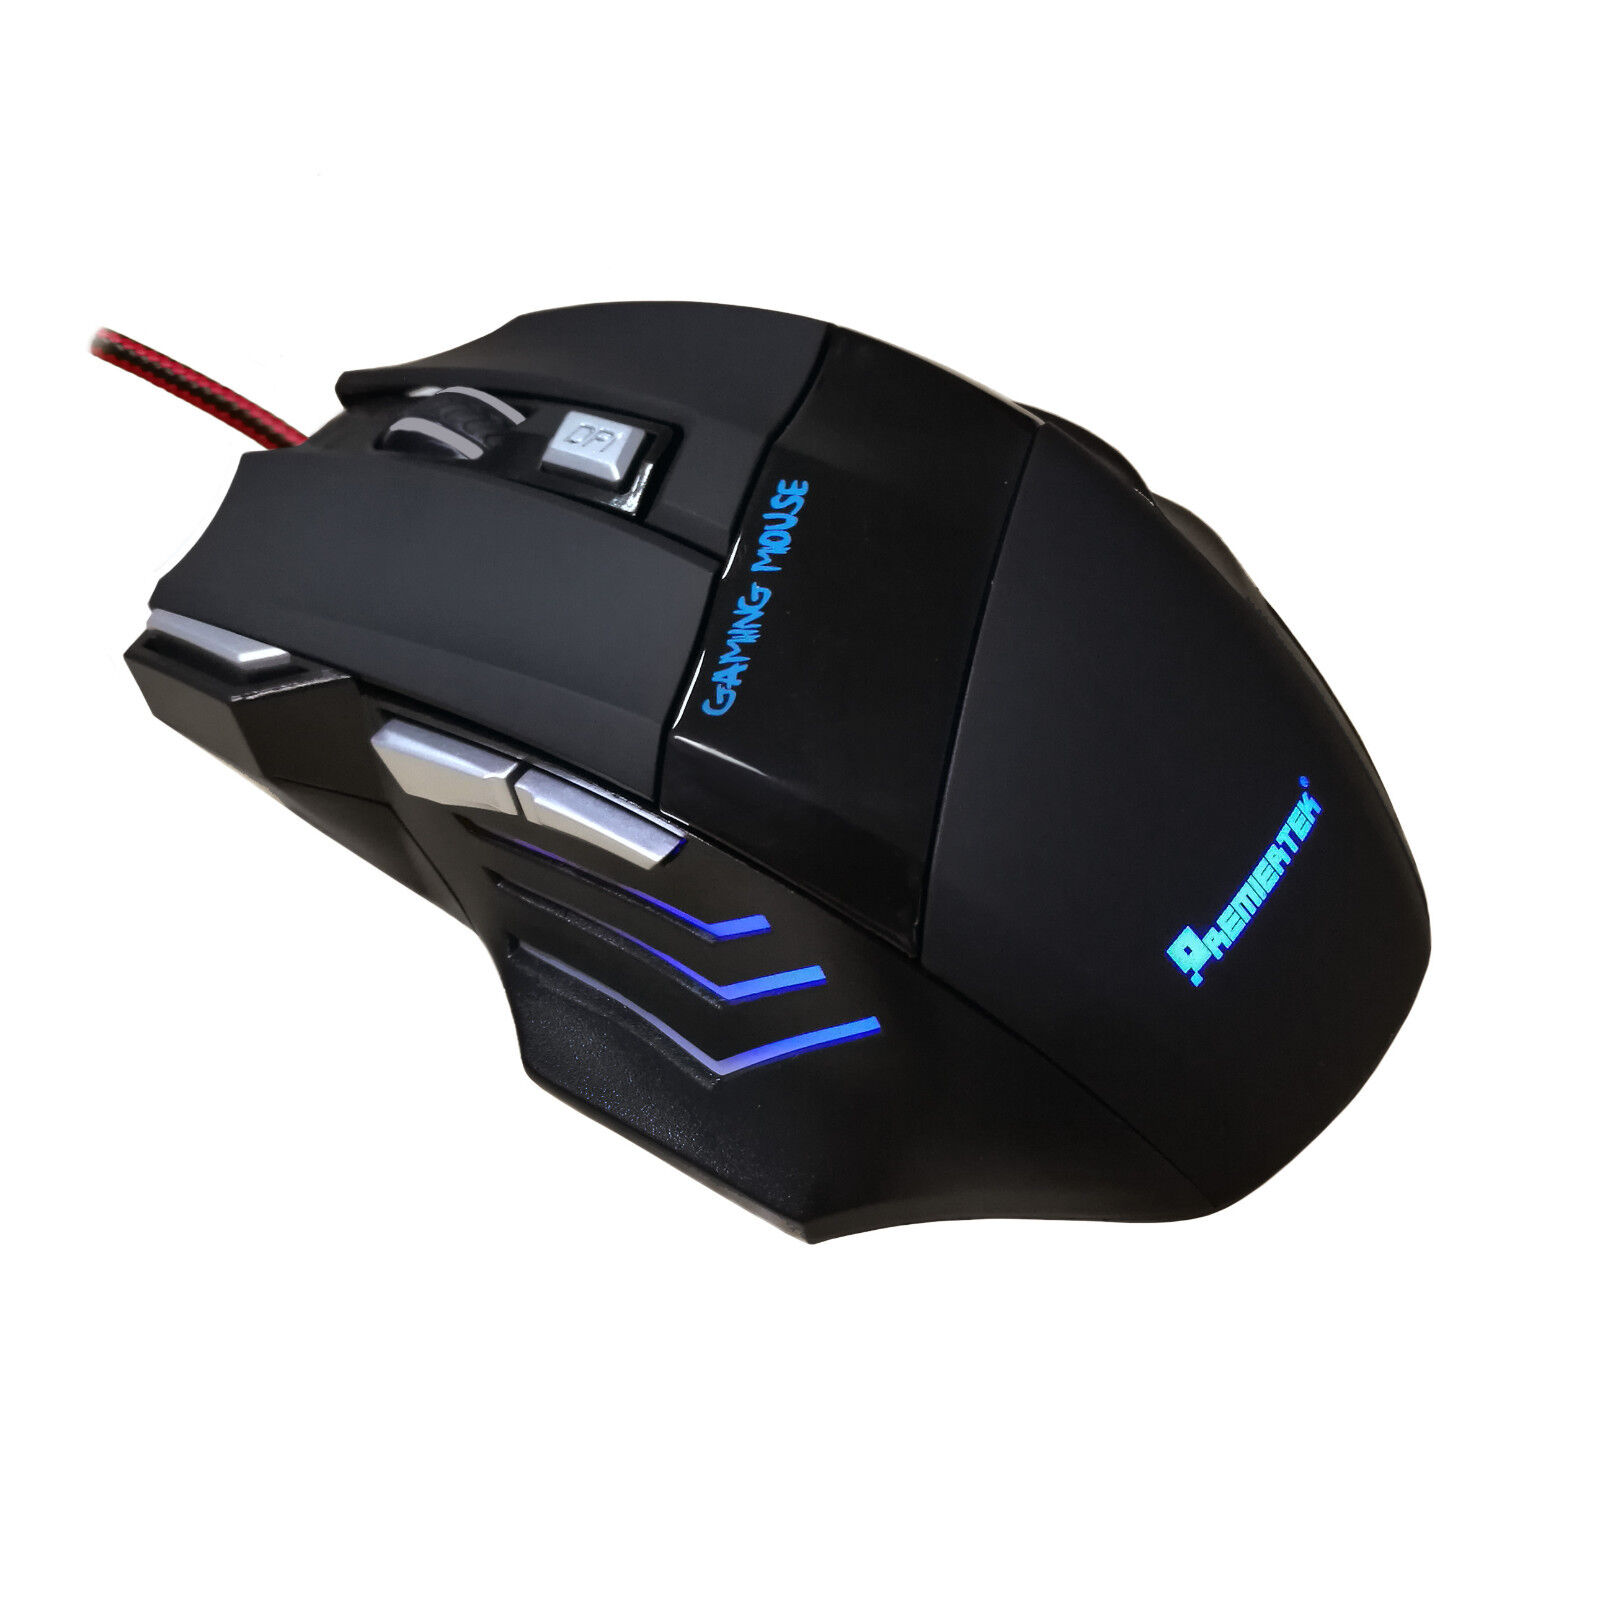 ????Gaming Mouse 7 Button USB 32 Wired trend rank LED Fire Max 89% OFF Breathing